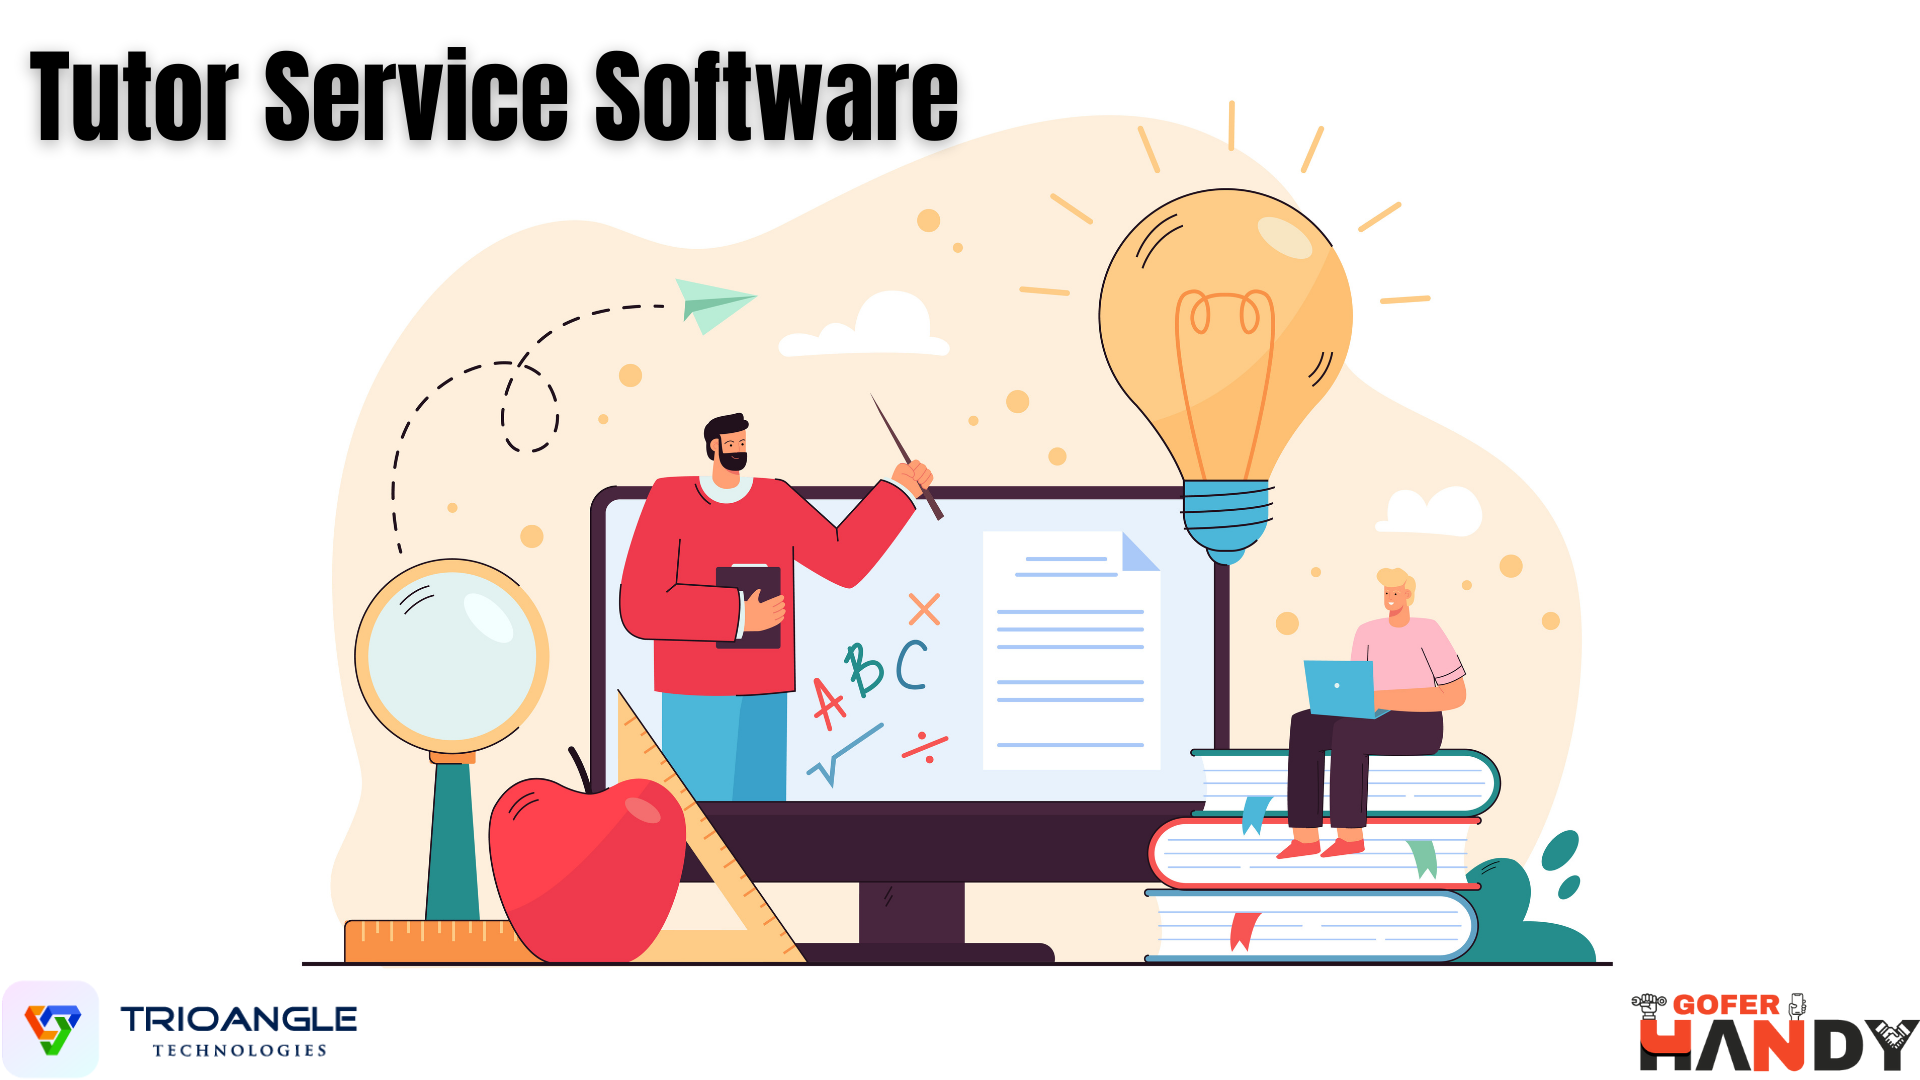 Article about Tutor Service Software